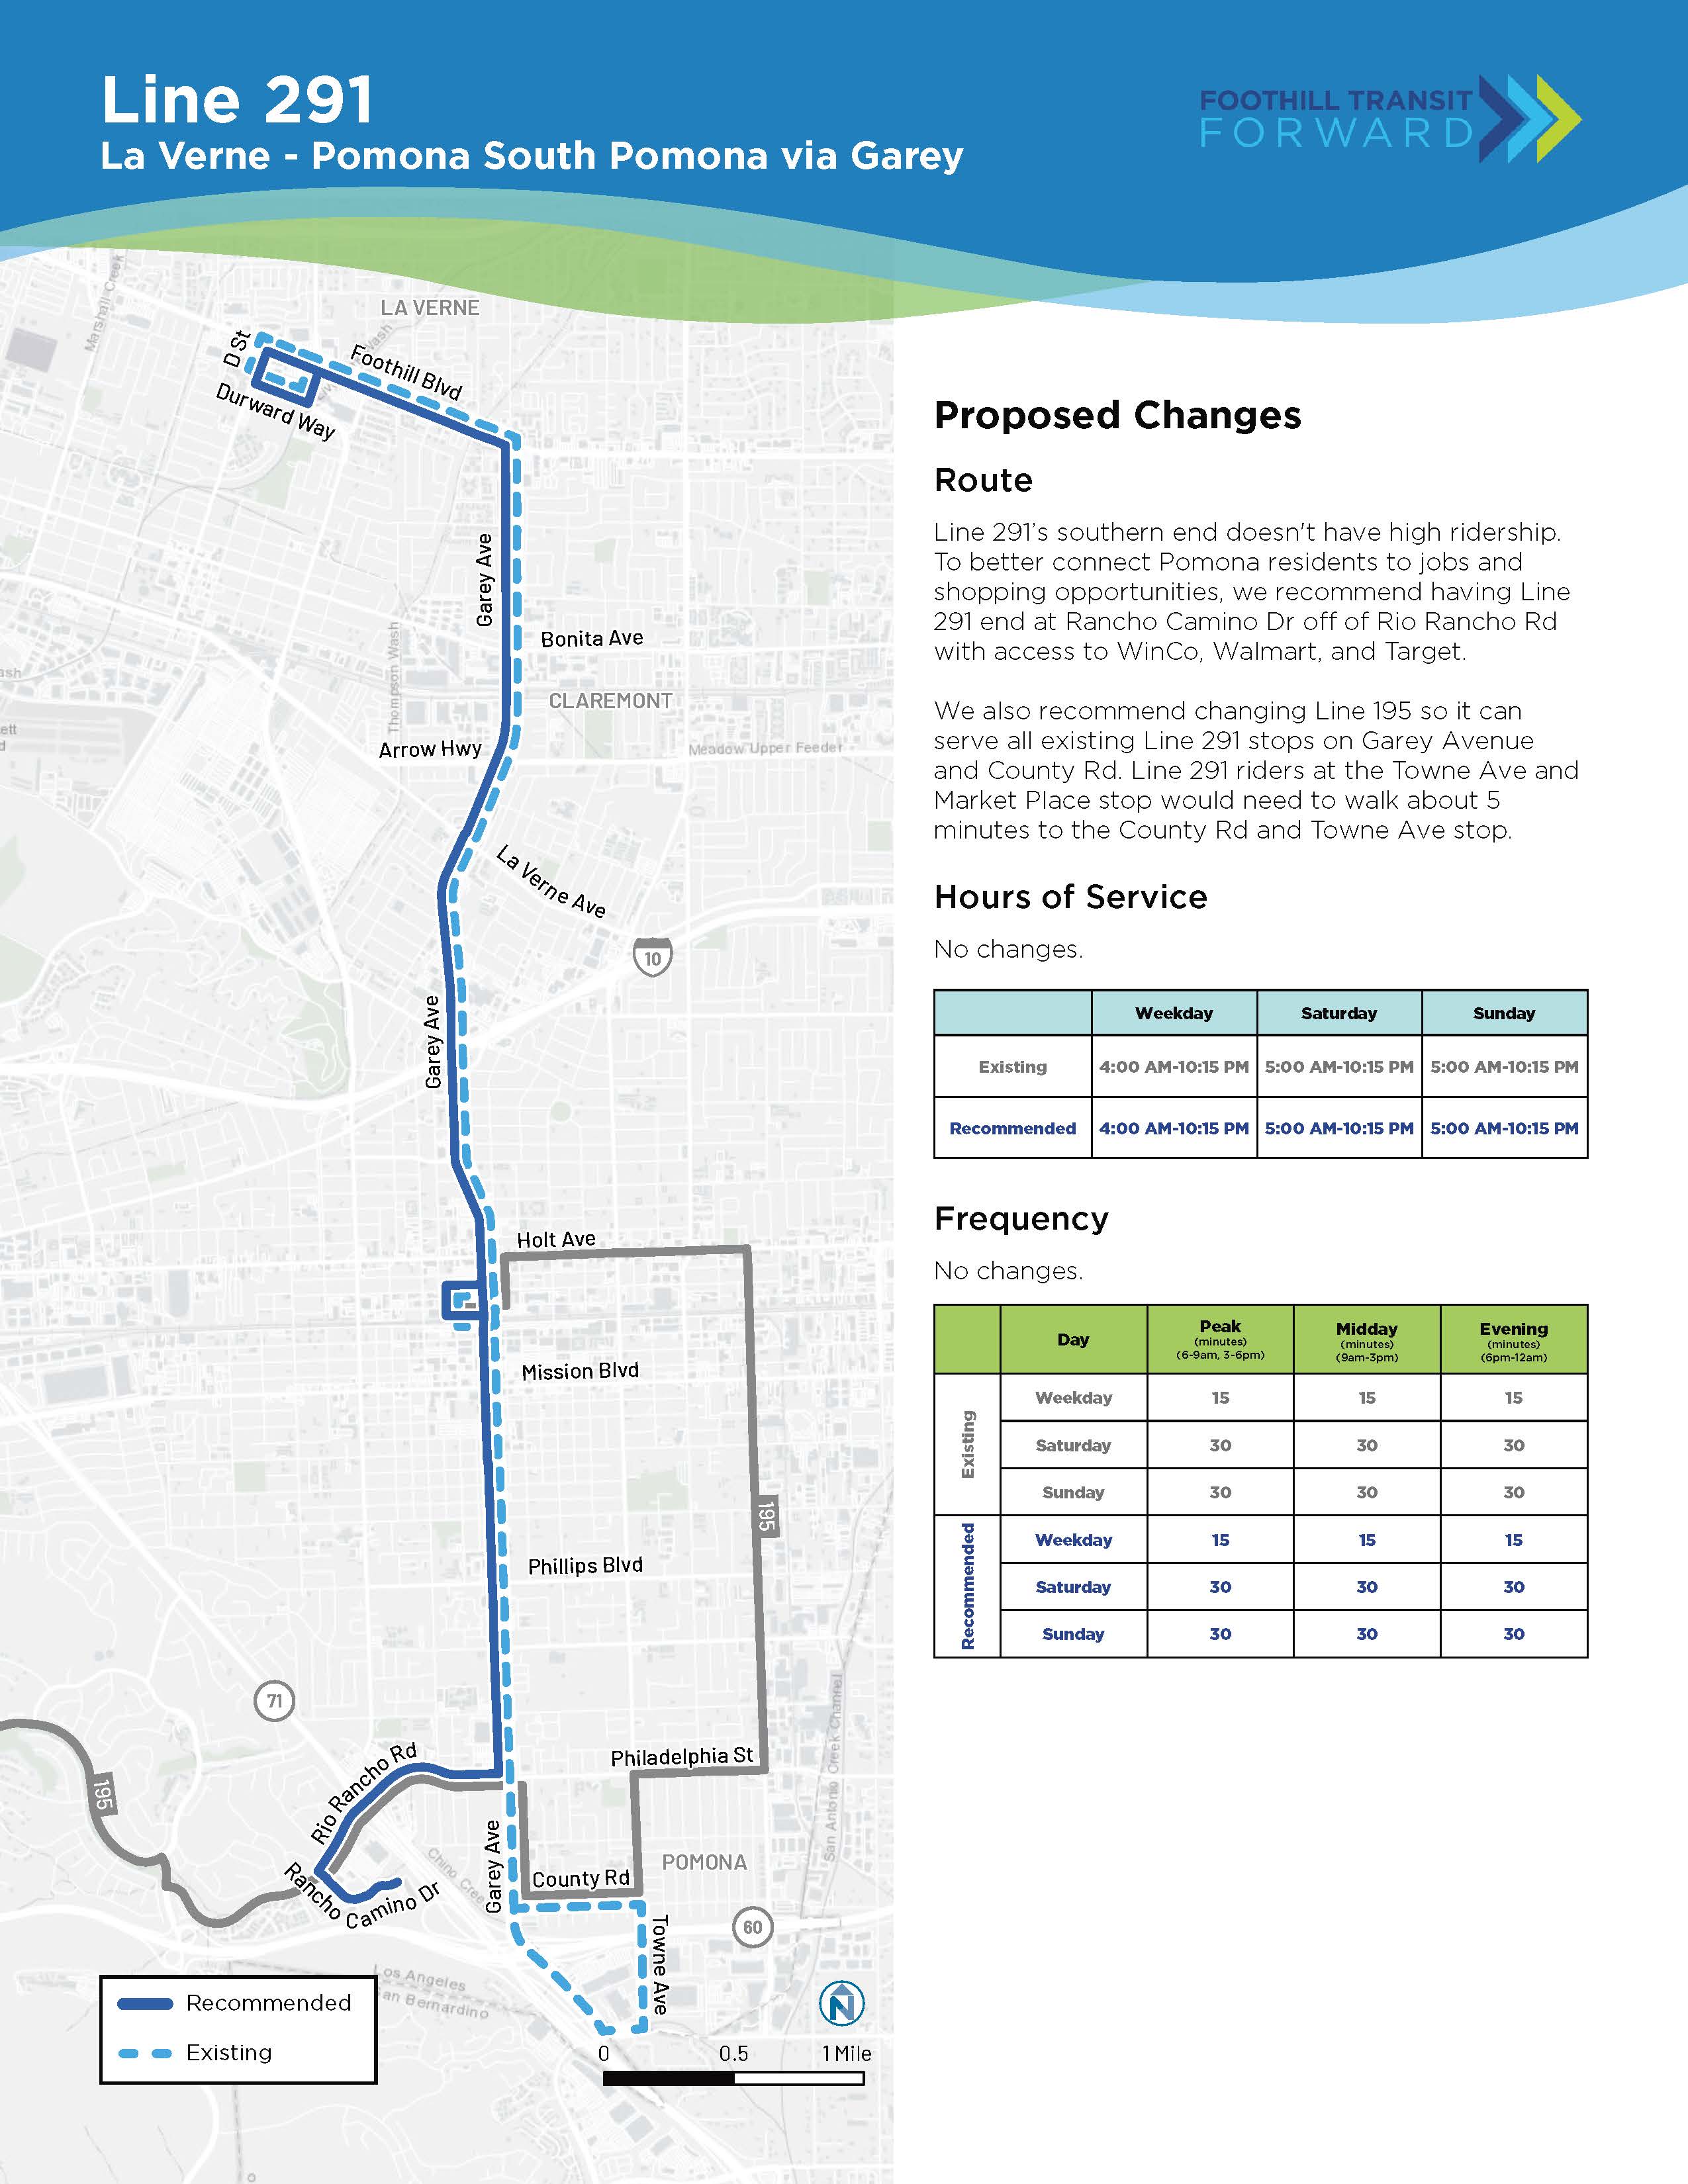 Proposed Changes: Route: Line 291’s southern end doesn't have high ridership.  To better connect Pomona residents to jobs and shopping opportunities, we recommend having Line 291 end at Rancho Camino Dr off of Rio Rancho Rd with access to WinCo, Walmart, and Target. We also recommend changing Line 195 so it can serve all existing Line 291 stops on Garey Ave and County Rd. Line 291 riders at Towne and Market would need to walk about 5 minutes to County and Towne. Hours of Service and Frequency: No changes.